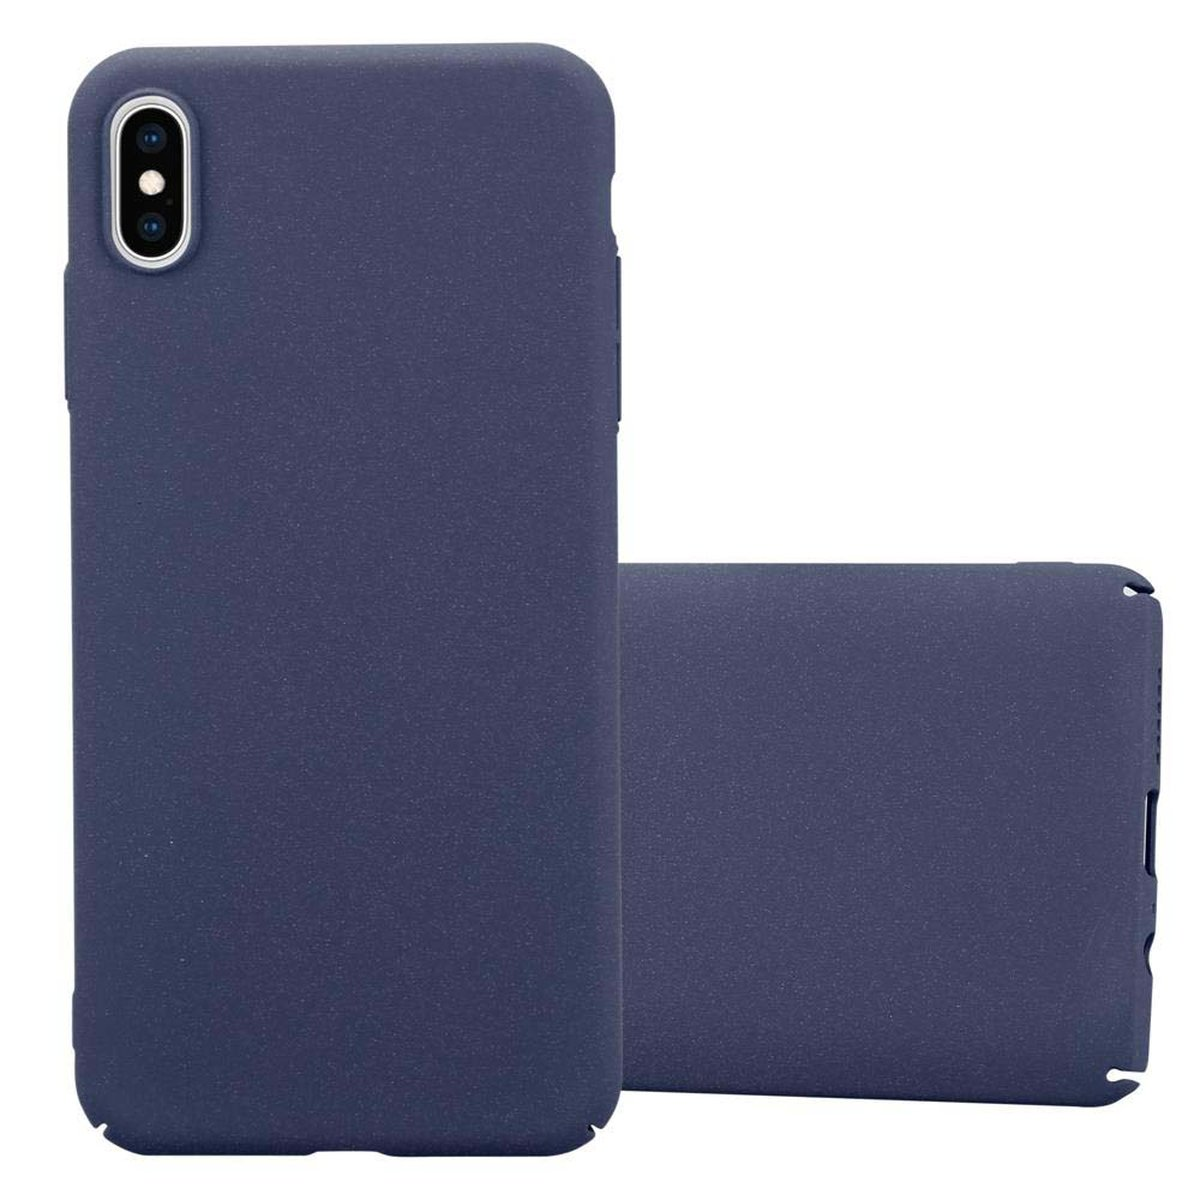 XS MAX, FROSTY BLAU iPhone Hülle Hard Style, Case im Frosty Apple, CADORABO Backcover,